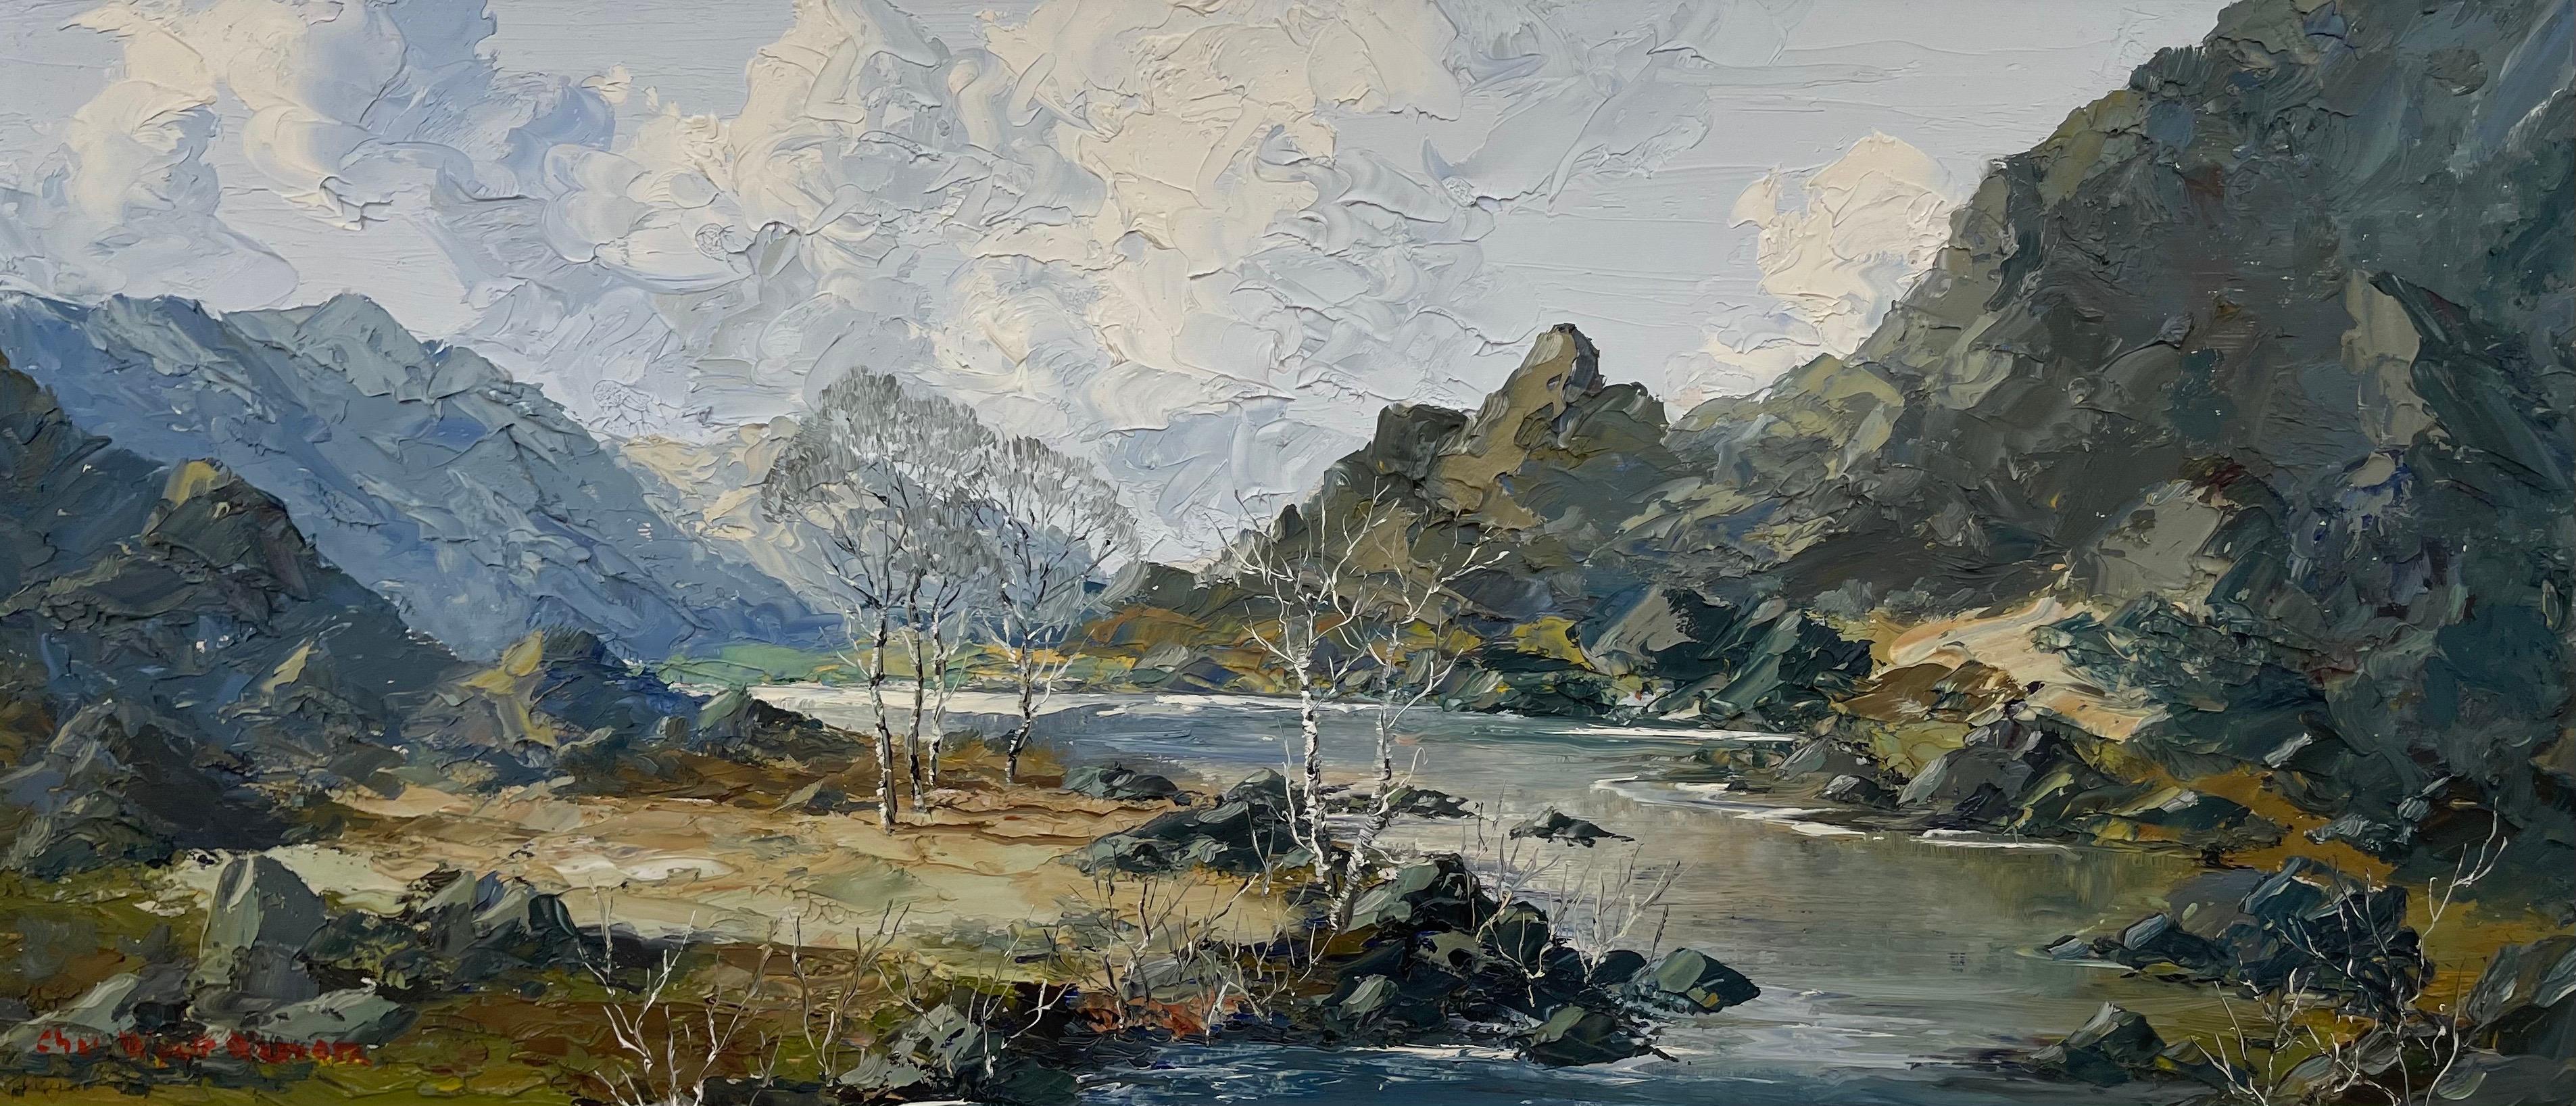 Impasto Oil Painting of River Mountain Scene in Wales by British Artist - Gray Landscape Painting by Charles Wyatt Warren